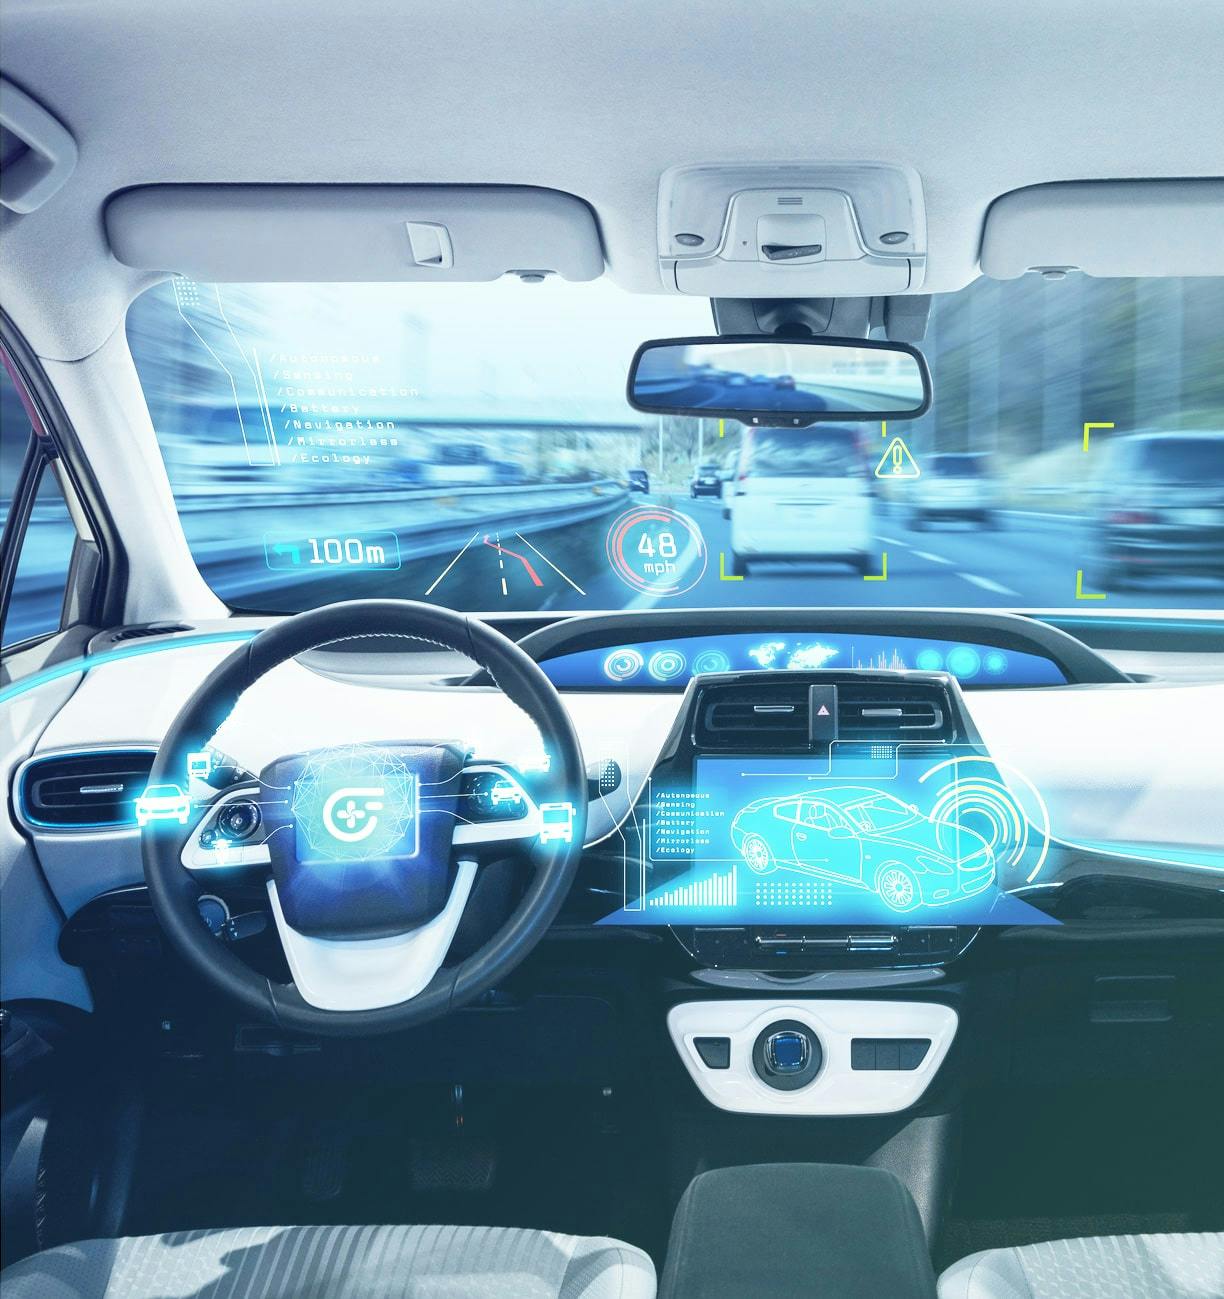 Interior of autonomous car with illustrated graphics showing key data points like speed, objects identification, directions, and sensors